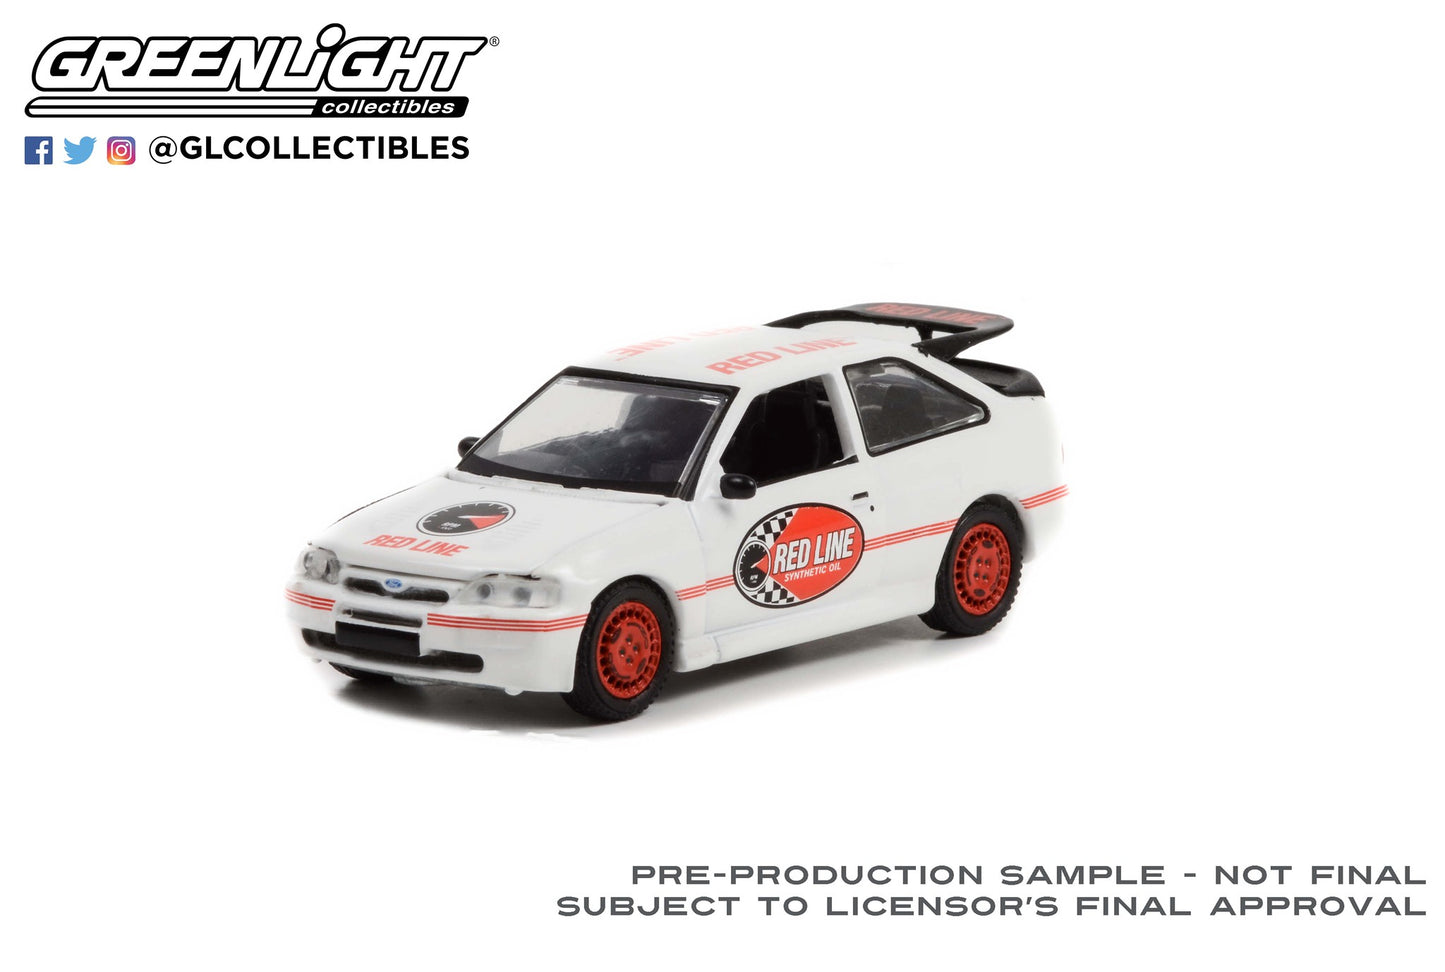 GreenLight 1:64 Running on Empty Series 14 - 1995 Ford Escort RS Cosworth - Red Line Synthetic Oil 41140-E